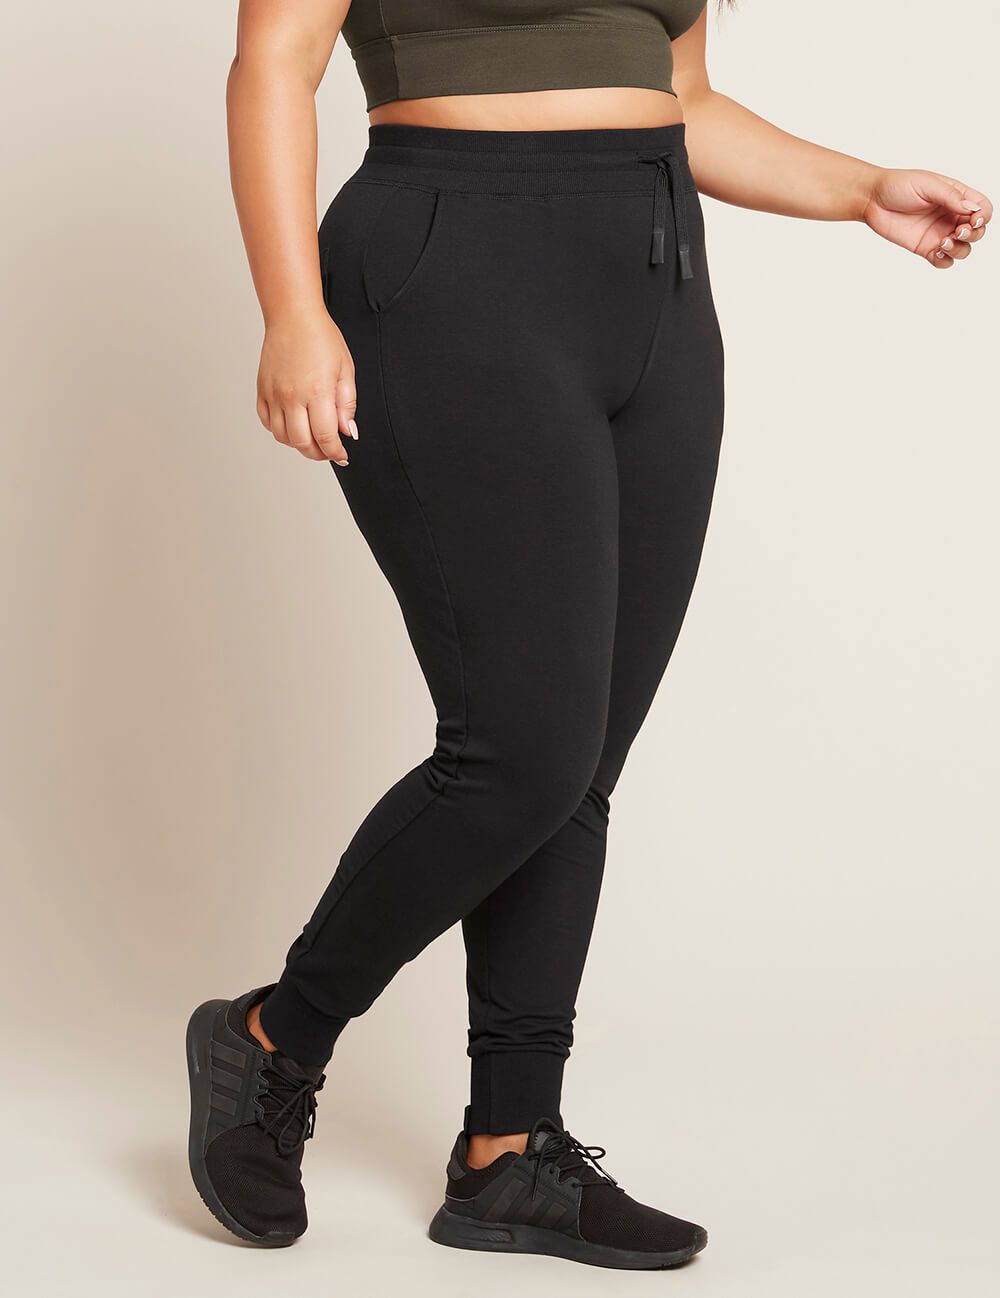 Boody Women's Weekend Jogger Pants - Provisions Mercantile